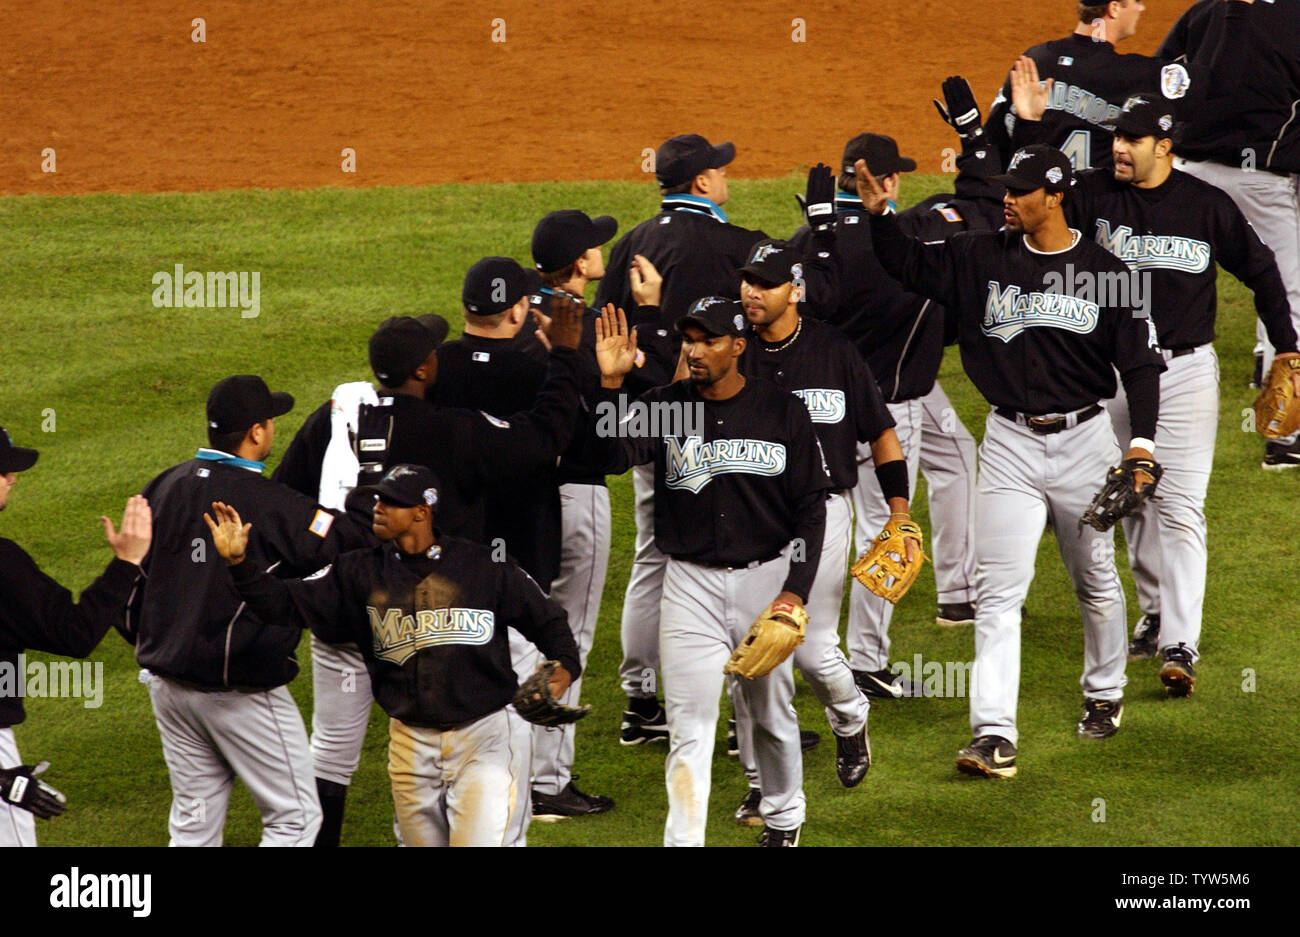 The Florida Marlins celebrate their 3-2 win over the New York Yankees in  Game 1 of the World Series at Yankee Stadium on October 18, 2003.  (UPI/Roger L. Wollenberg Stock Photo - Alamy